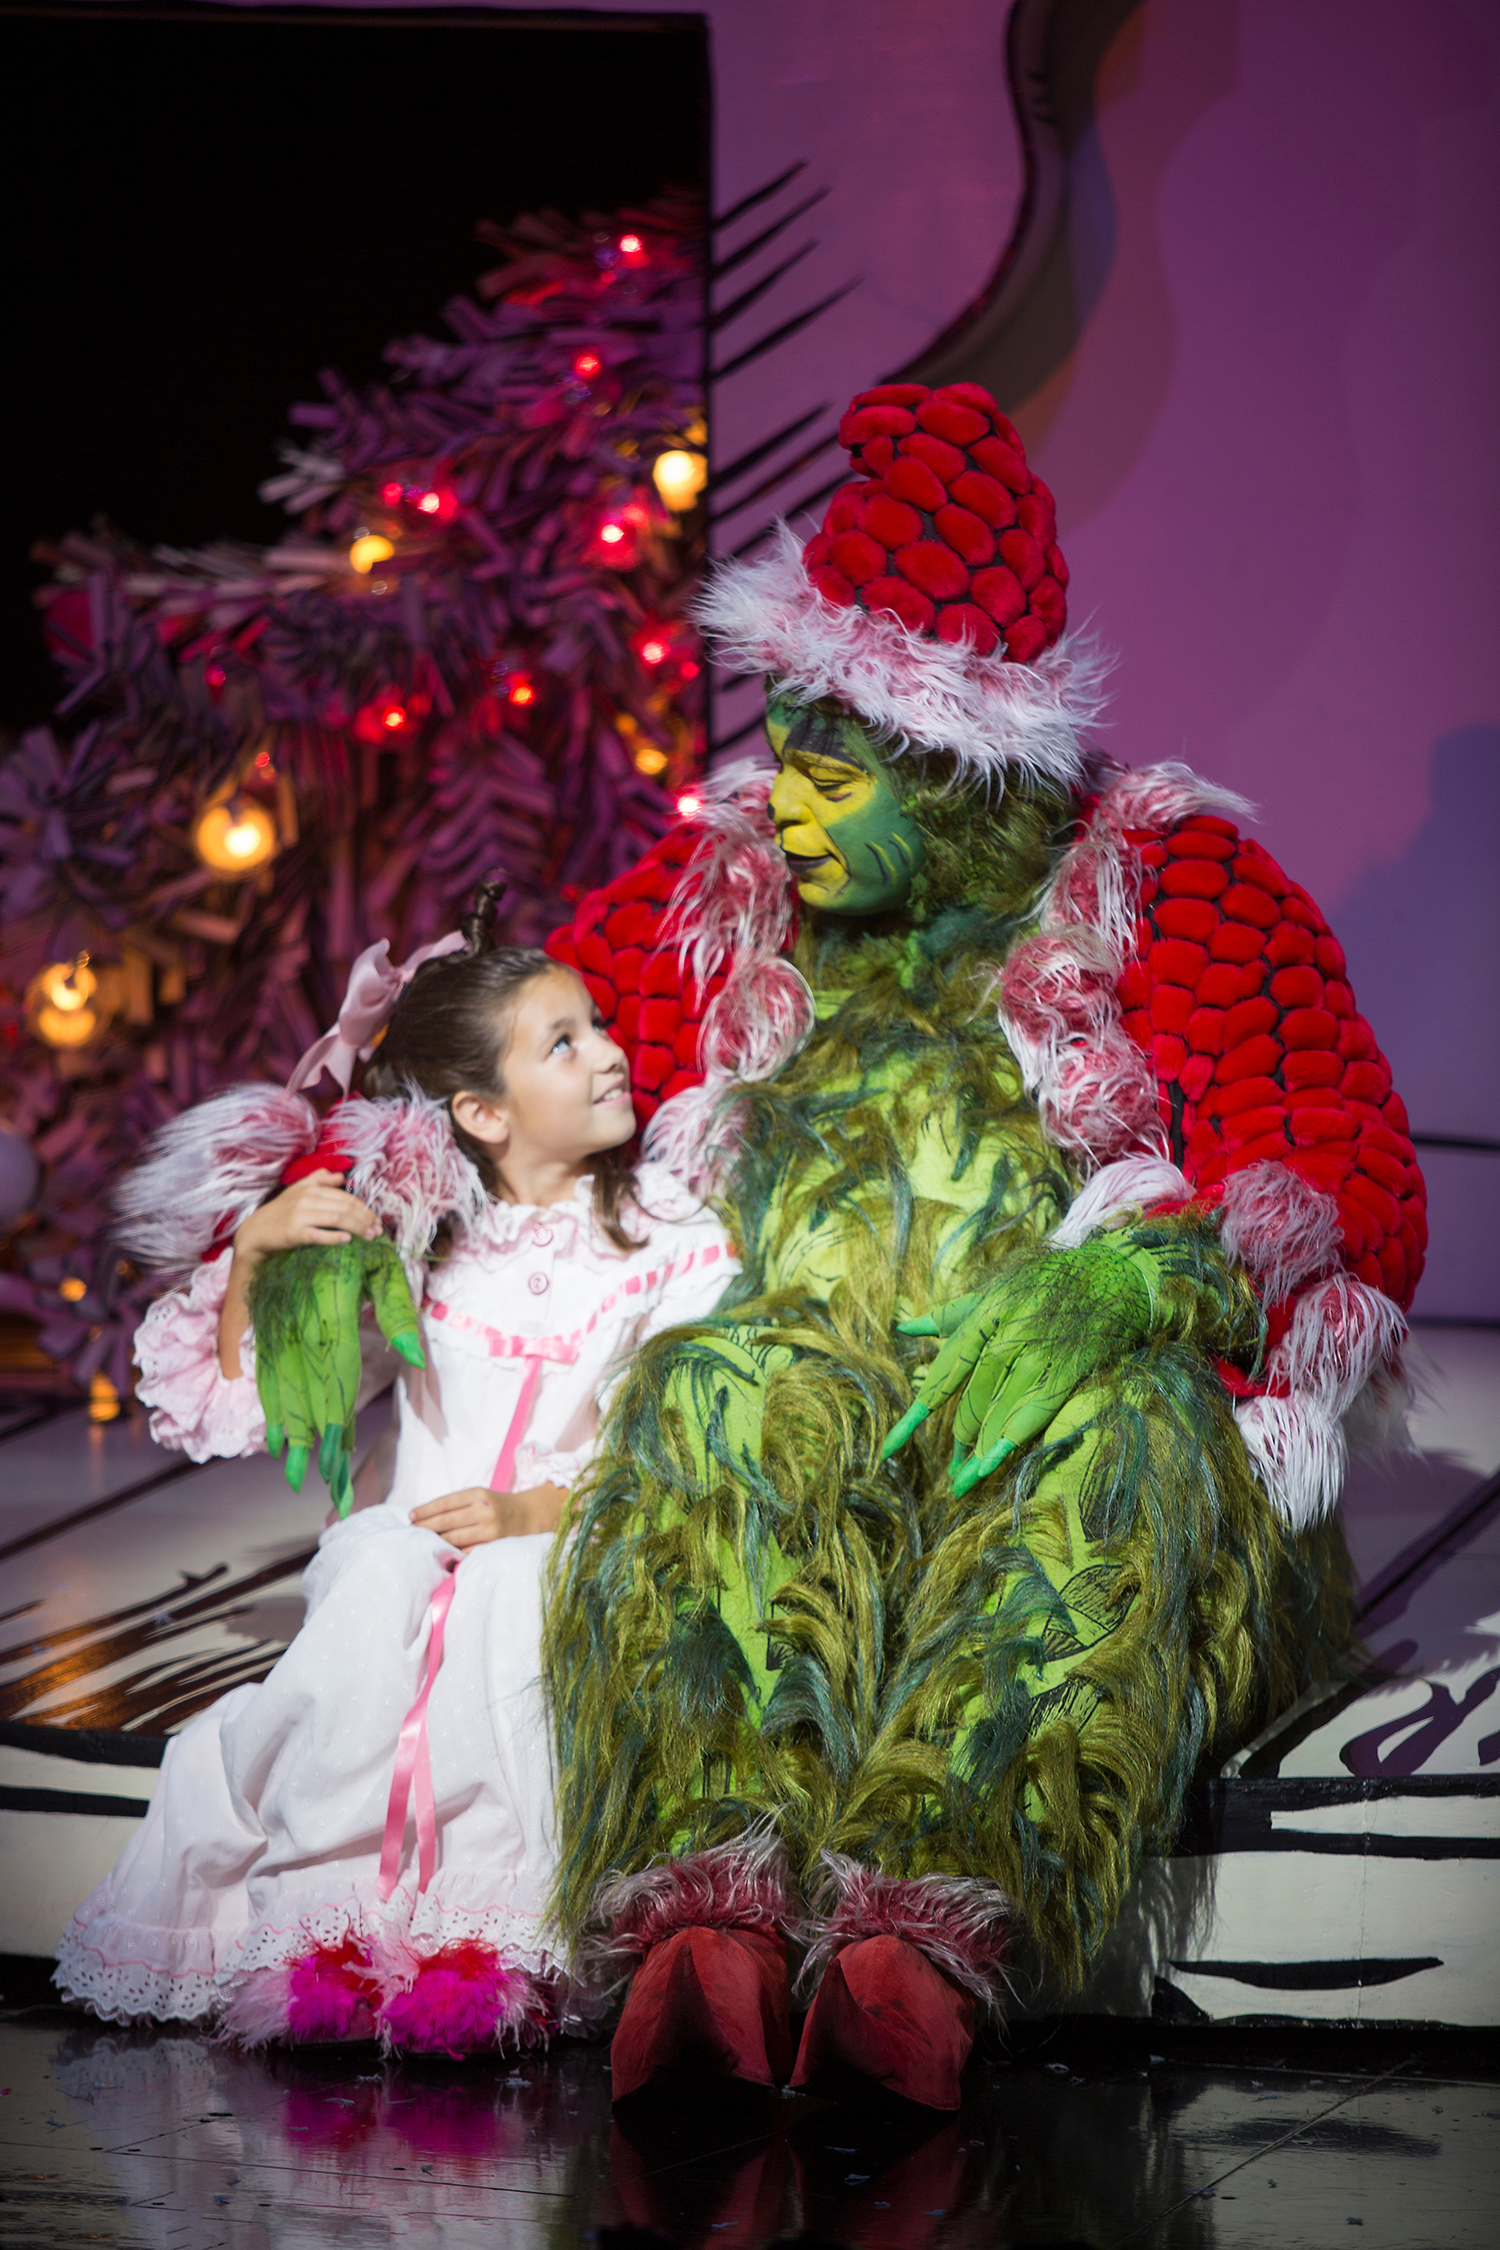 It's Giving the Grinch That Stole Christmas': Marjorie Harvey's